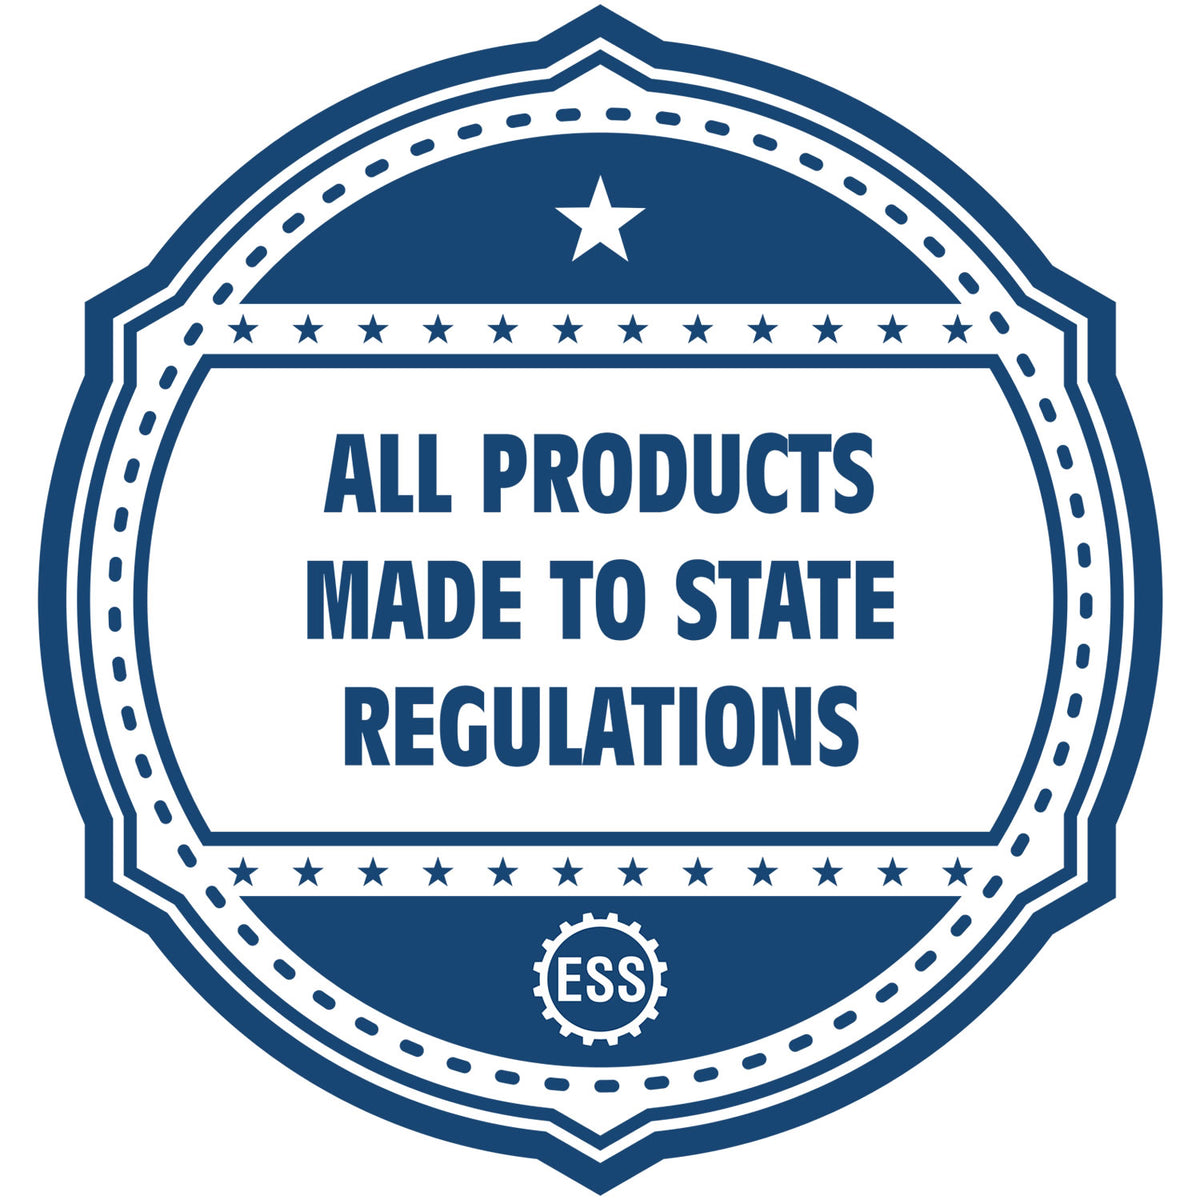 A blue icon or badge for the Gift Illinois Architect Seal showing that this product is made in compliance with state regulations.